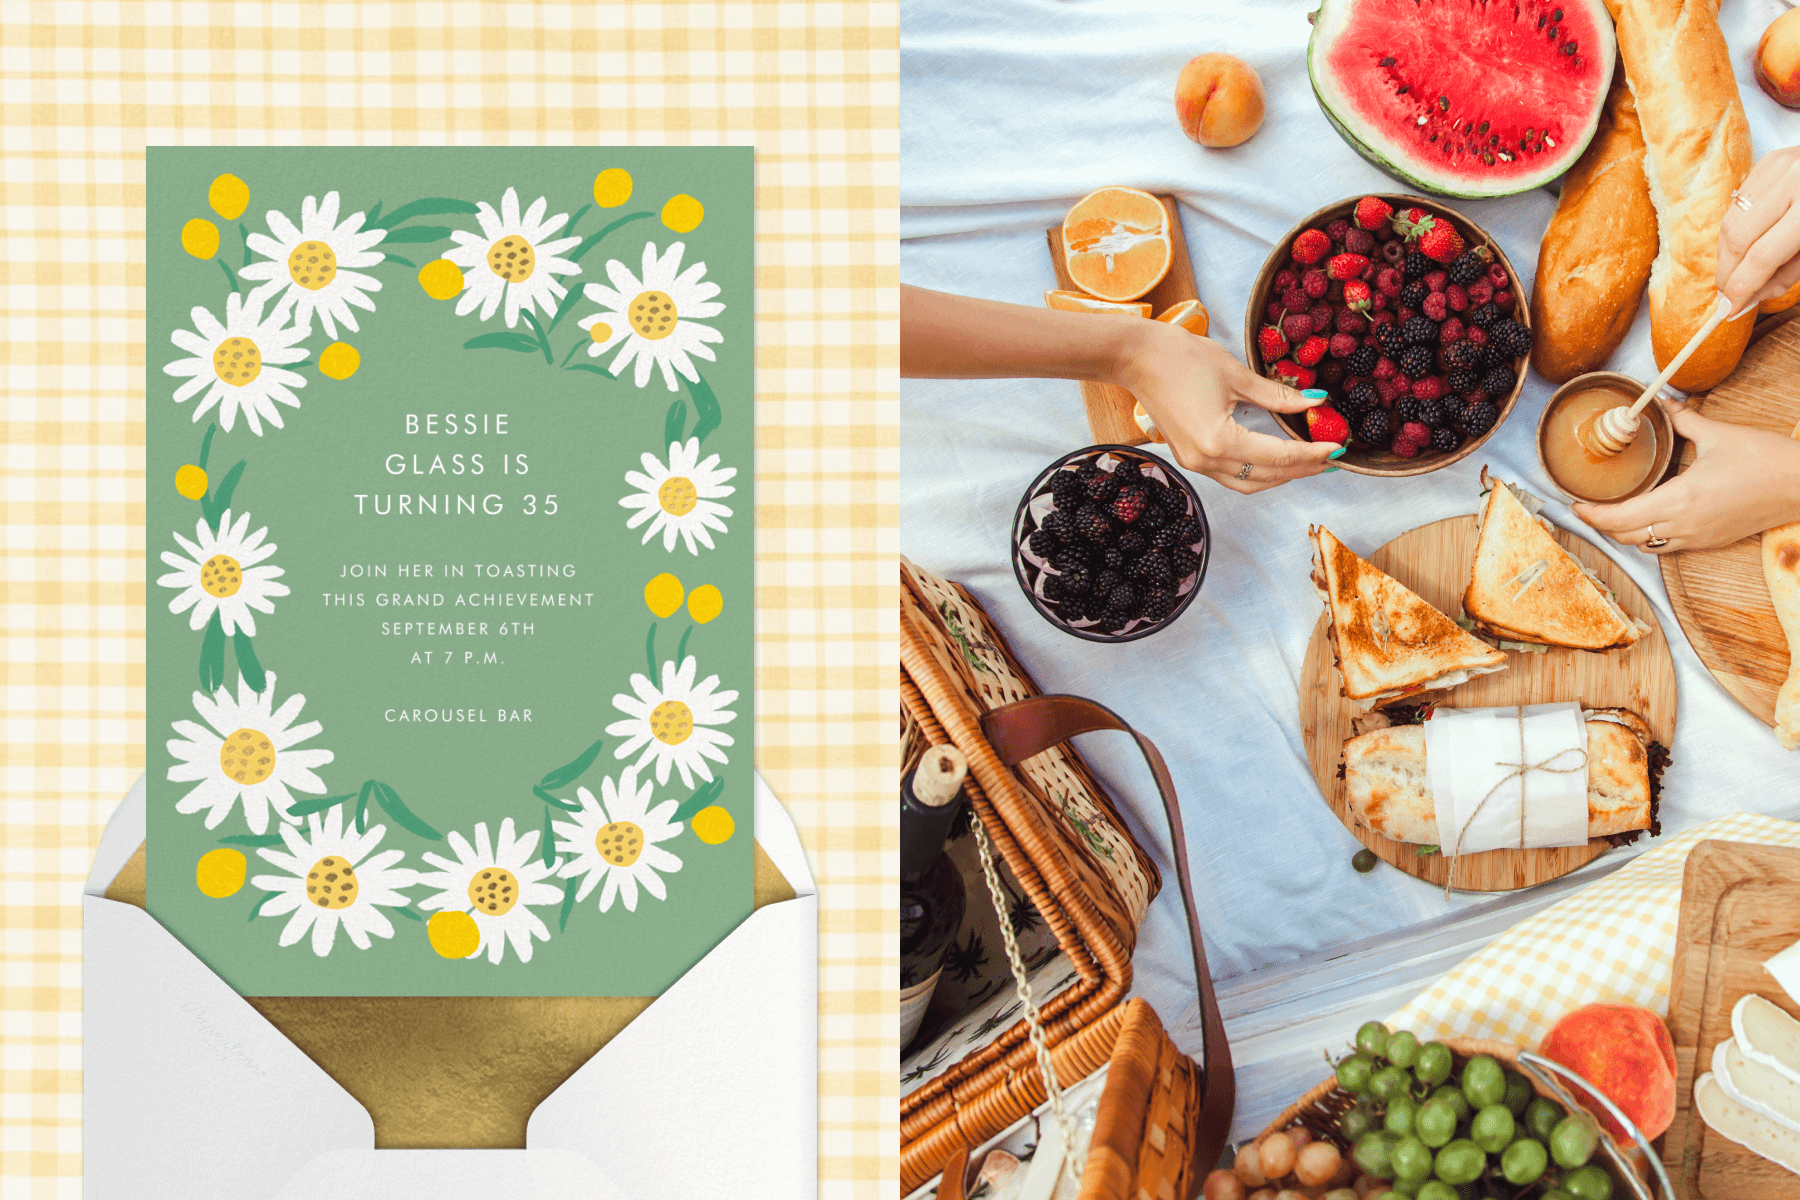 A green invitation with a daisy border and white envelope with gold liner; hands reach for food at a picnic with berries and sandwiches